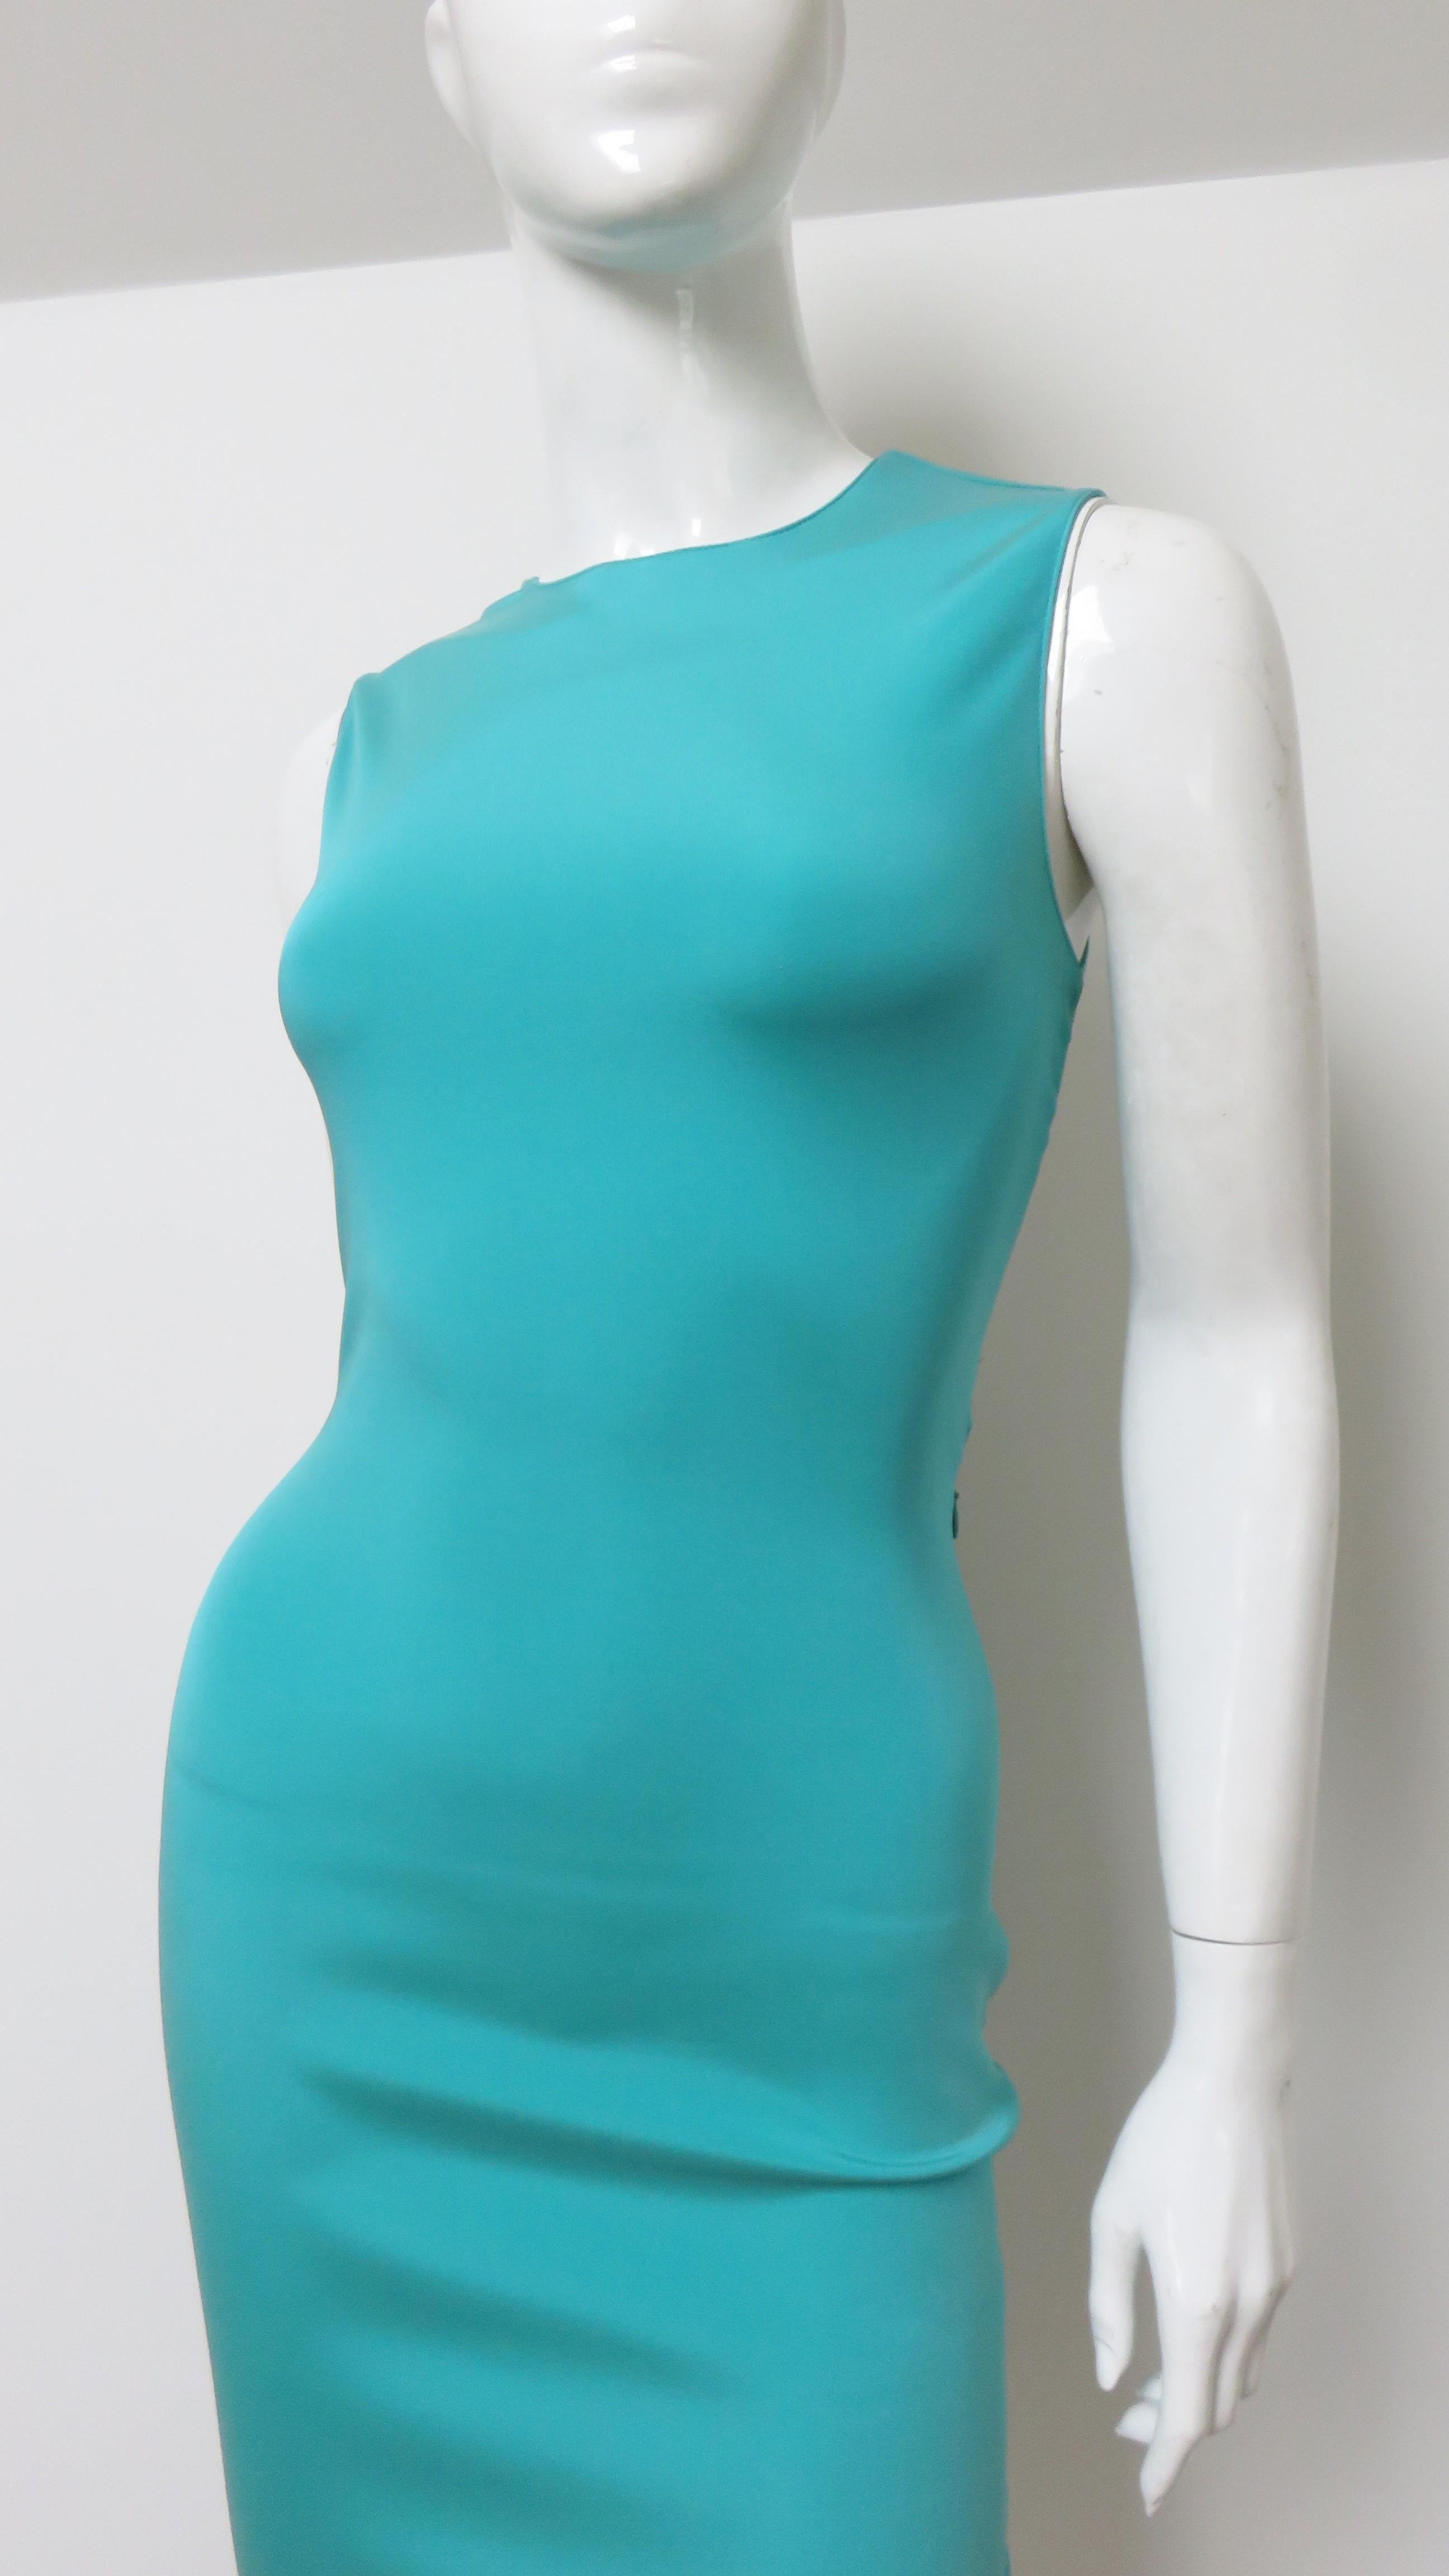 Gianni Versace Cut out Back Silk Dress with Grommets S/S 2003 For Sale 6